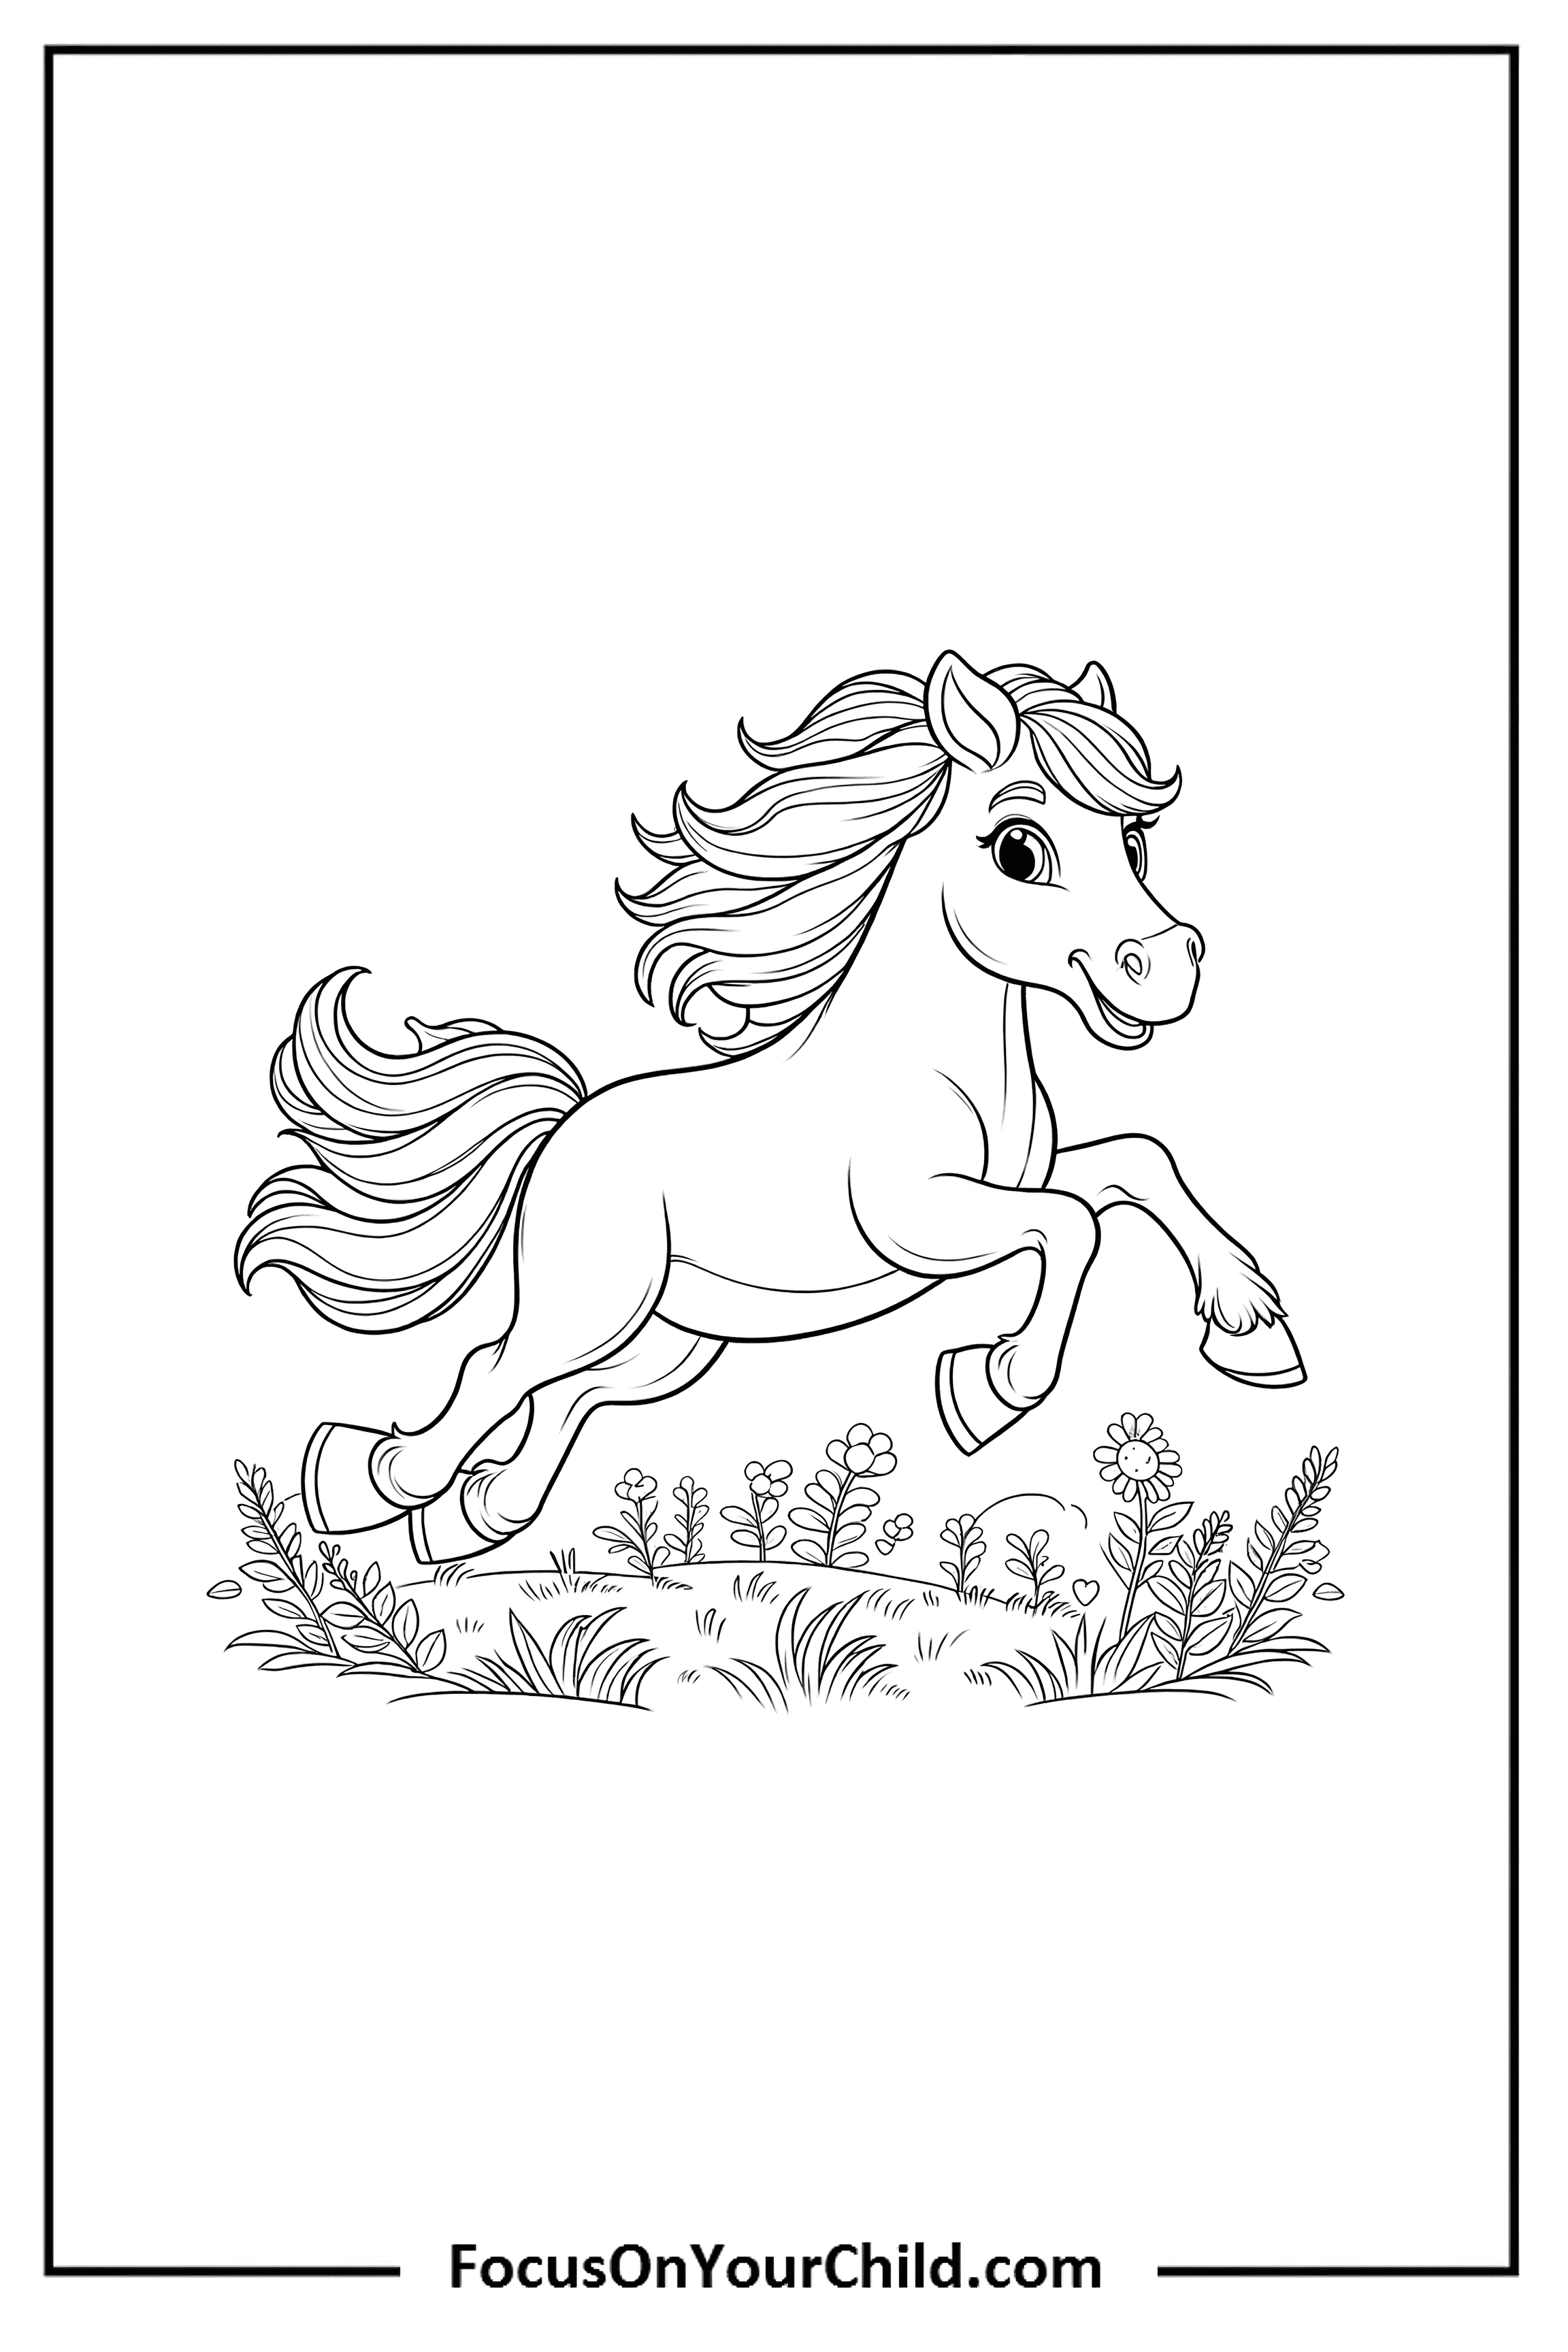 Joyful horse prancing in nature, black-and-white line drawing for coloring activity.